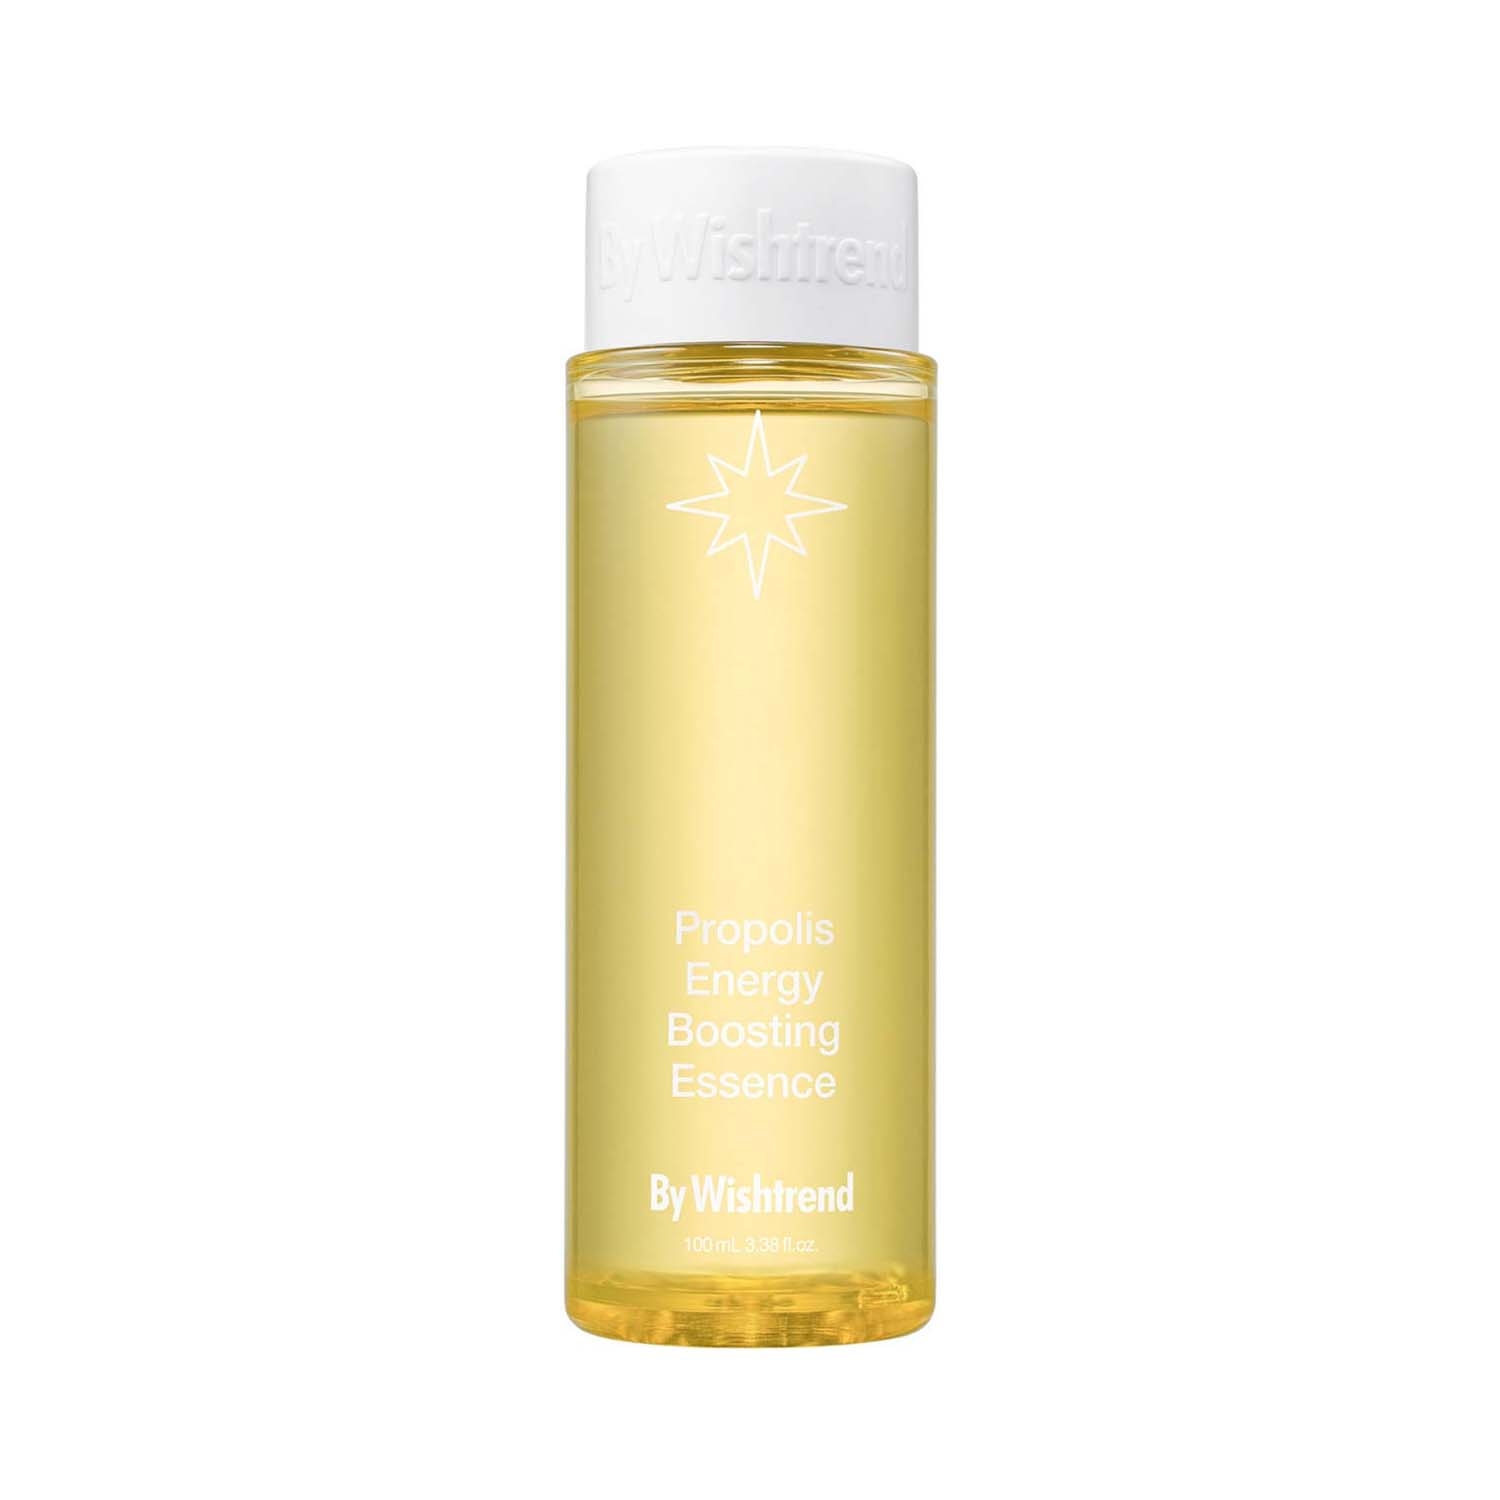 By Wishtrend | By Wishtrend Propolis Energy Boosting Essence (100ml)